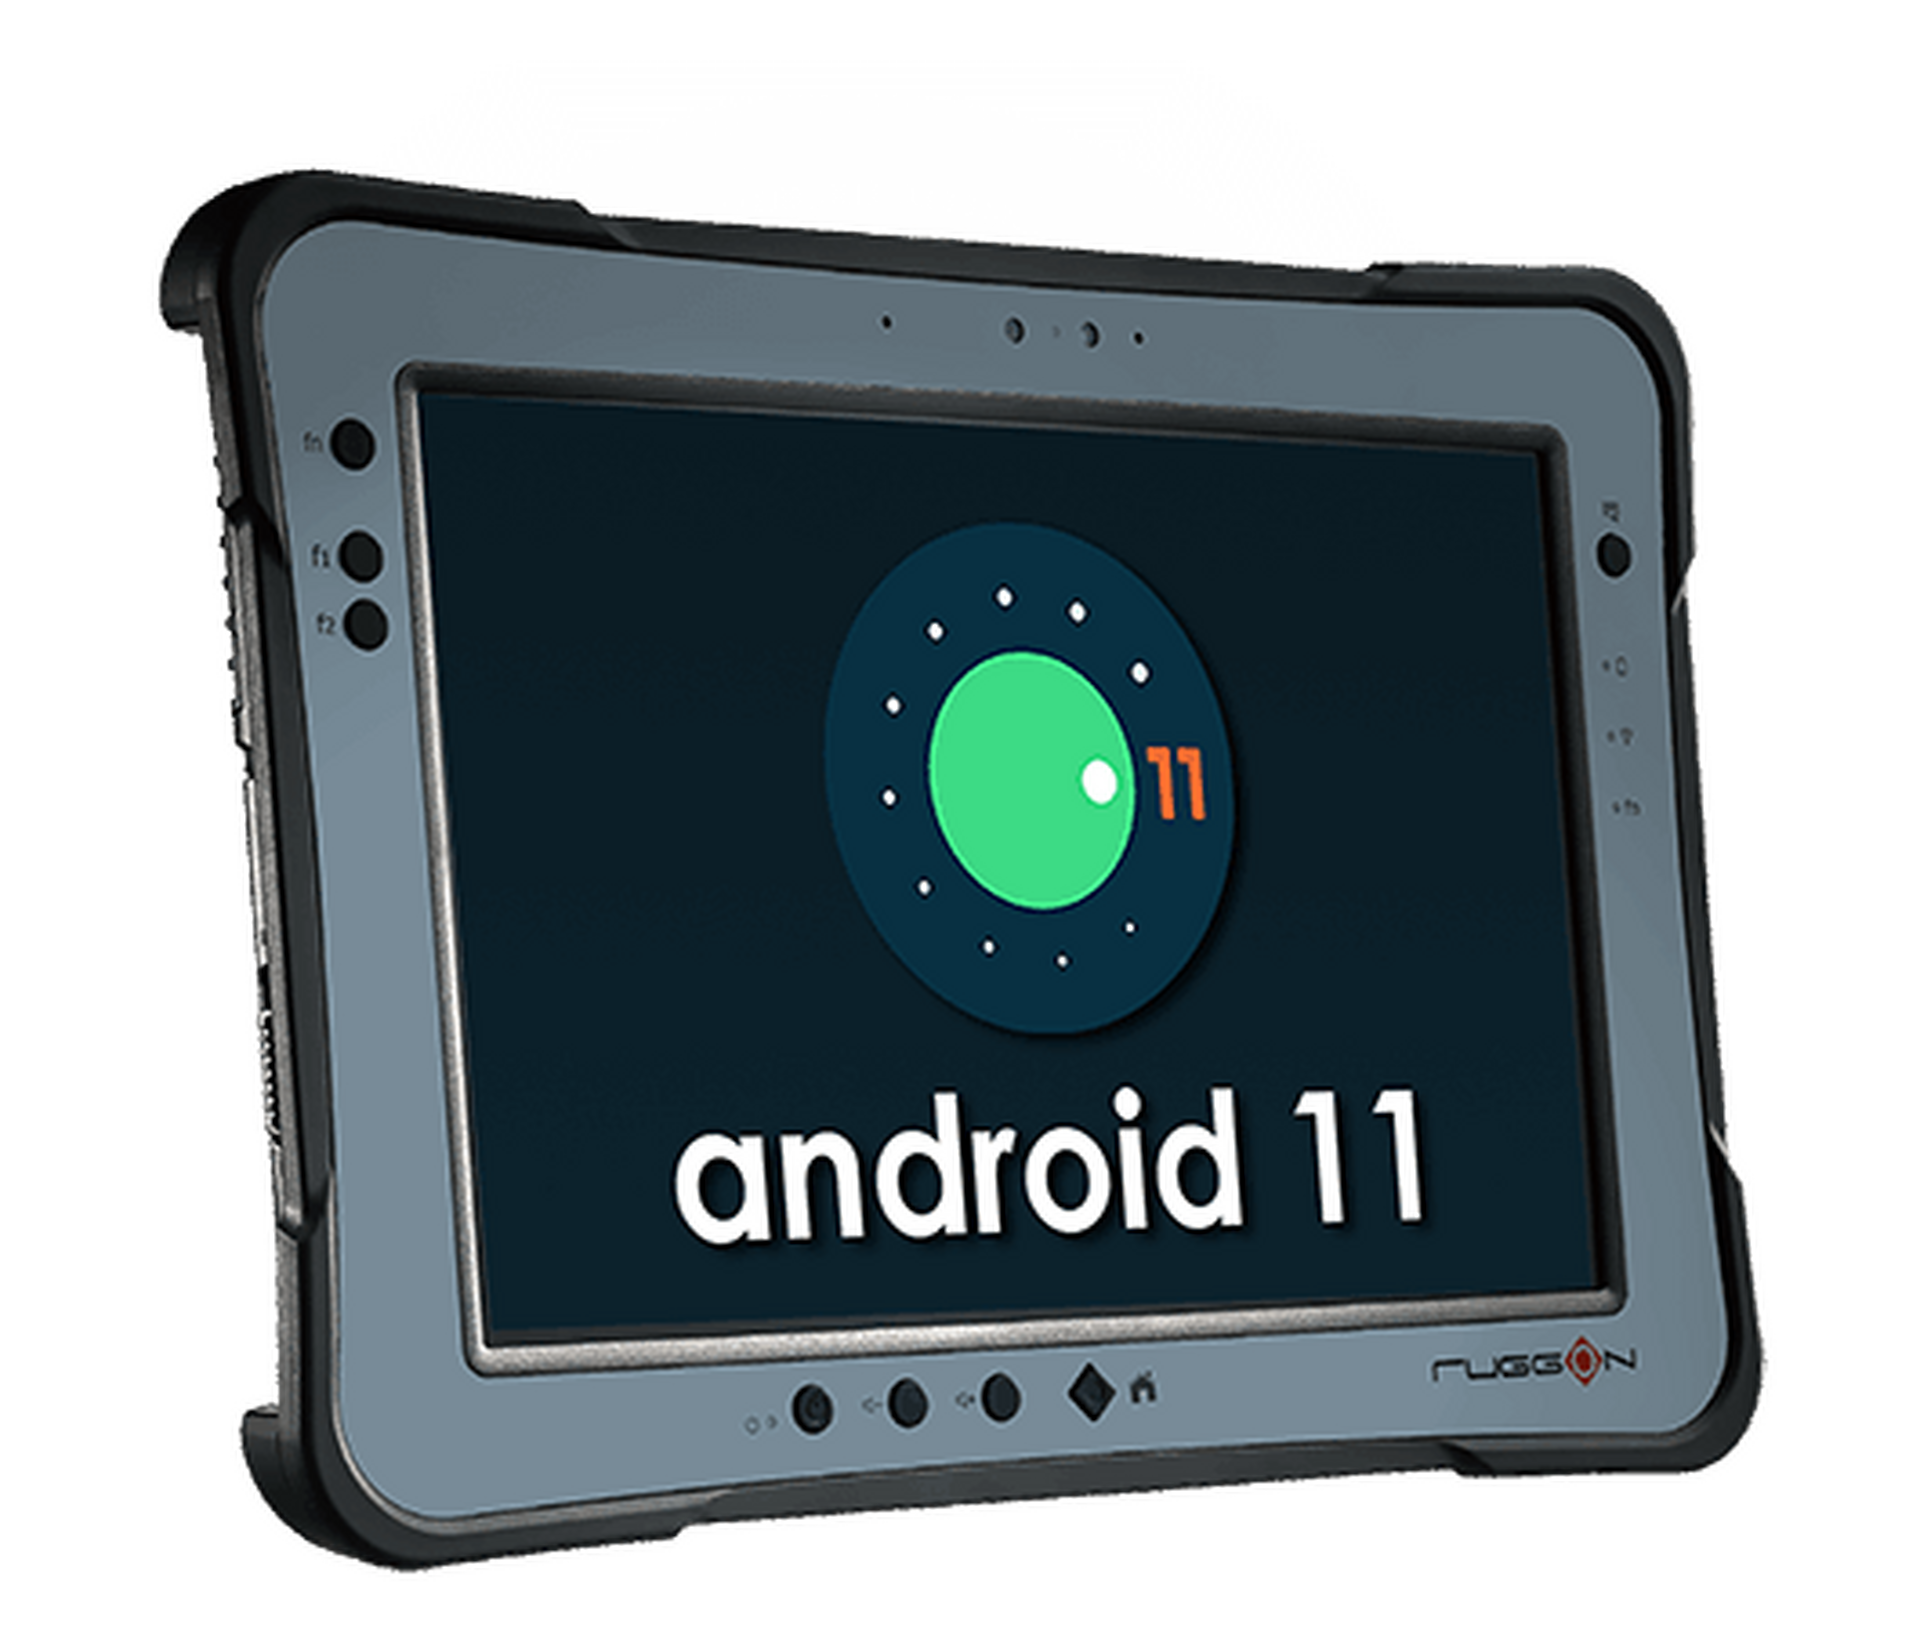 Rugg ON SOLPA501 rugged tablet Android11